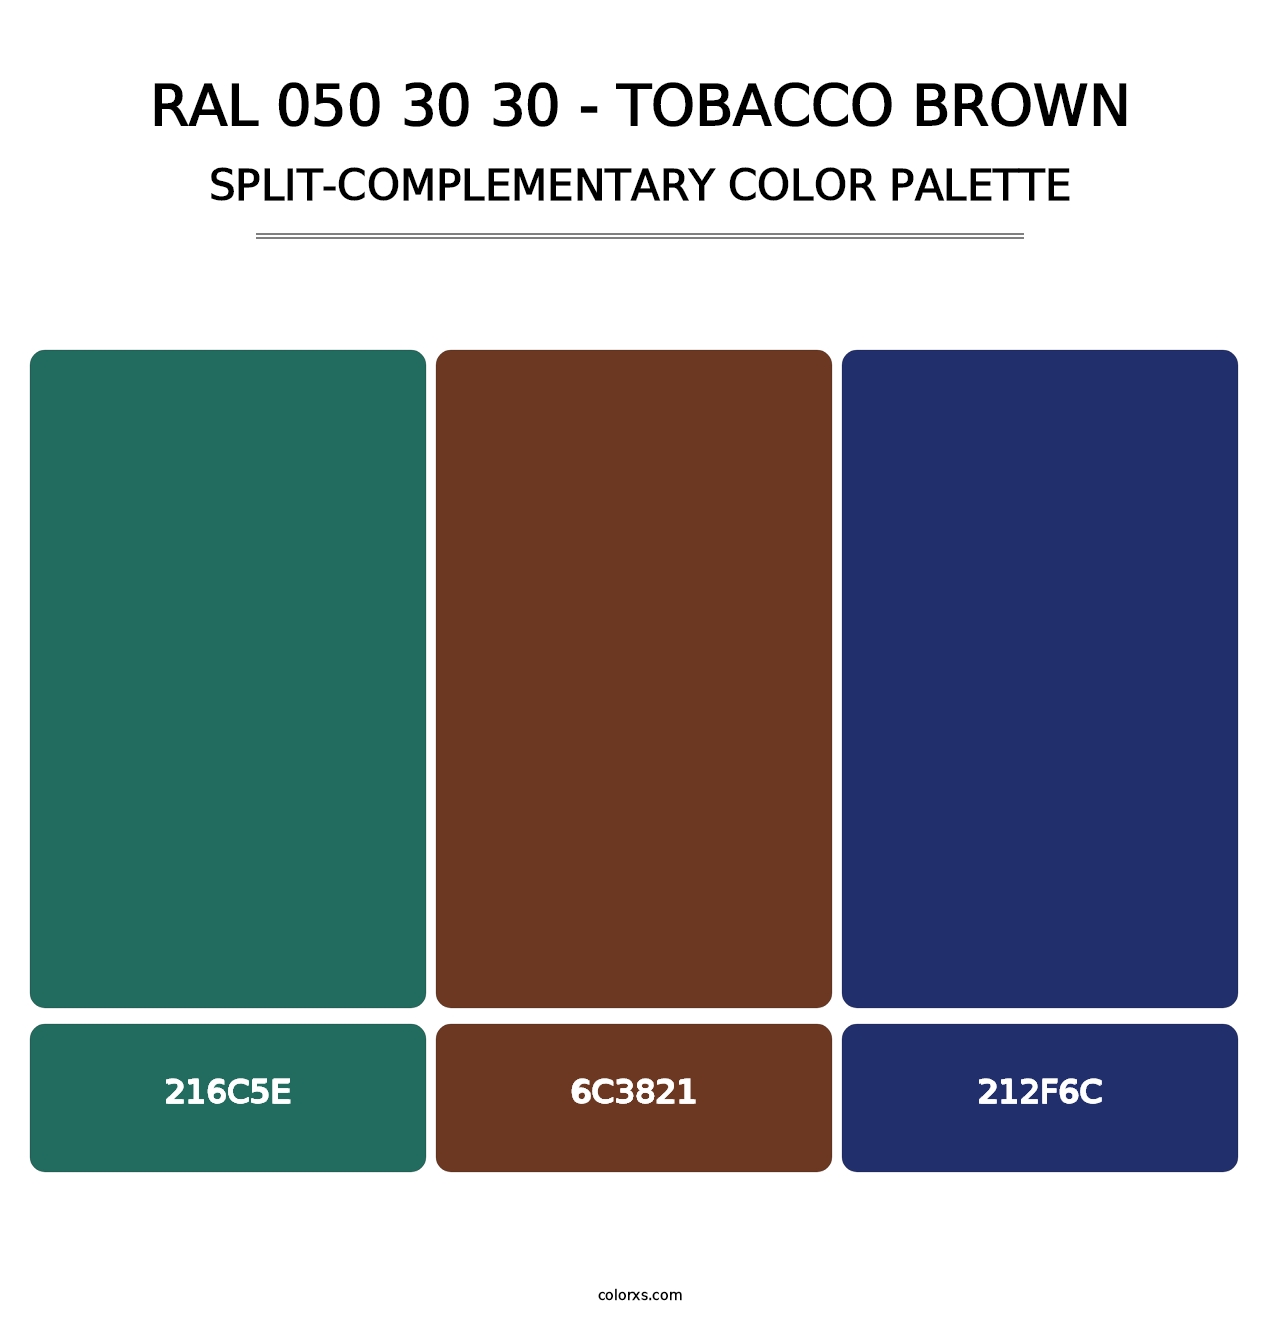 RAL 050 30 30 - Tobacco Brown - Split-Complementary Color Palette